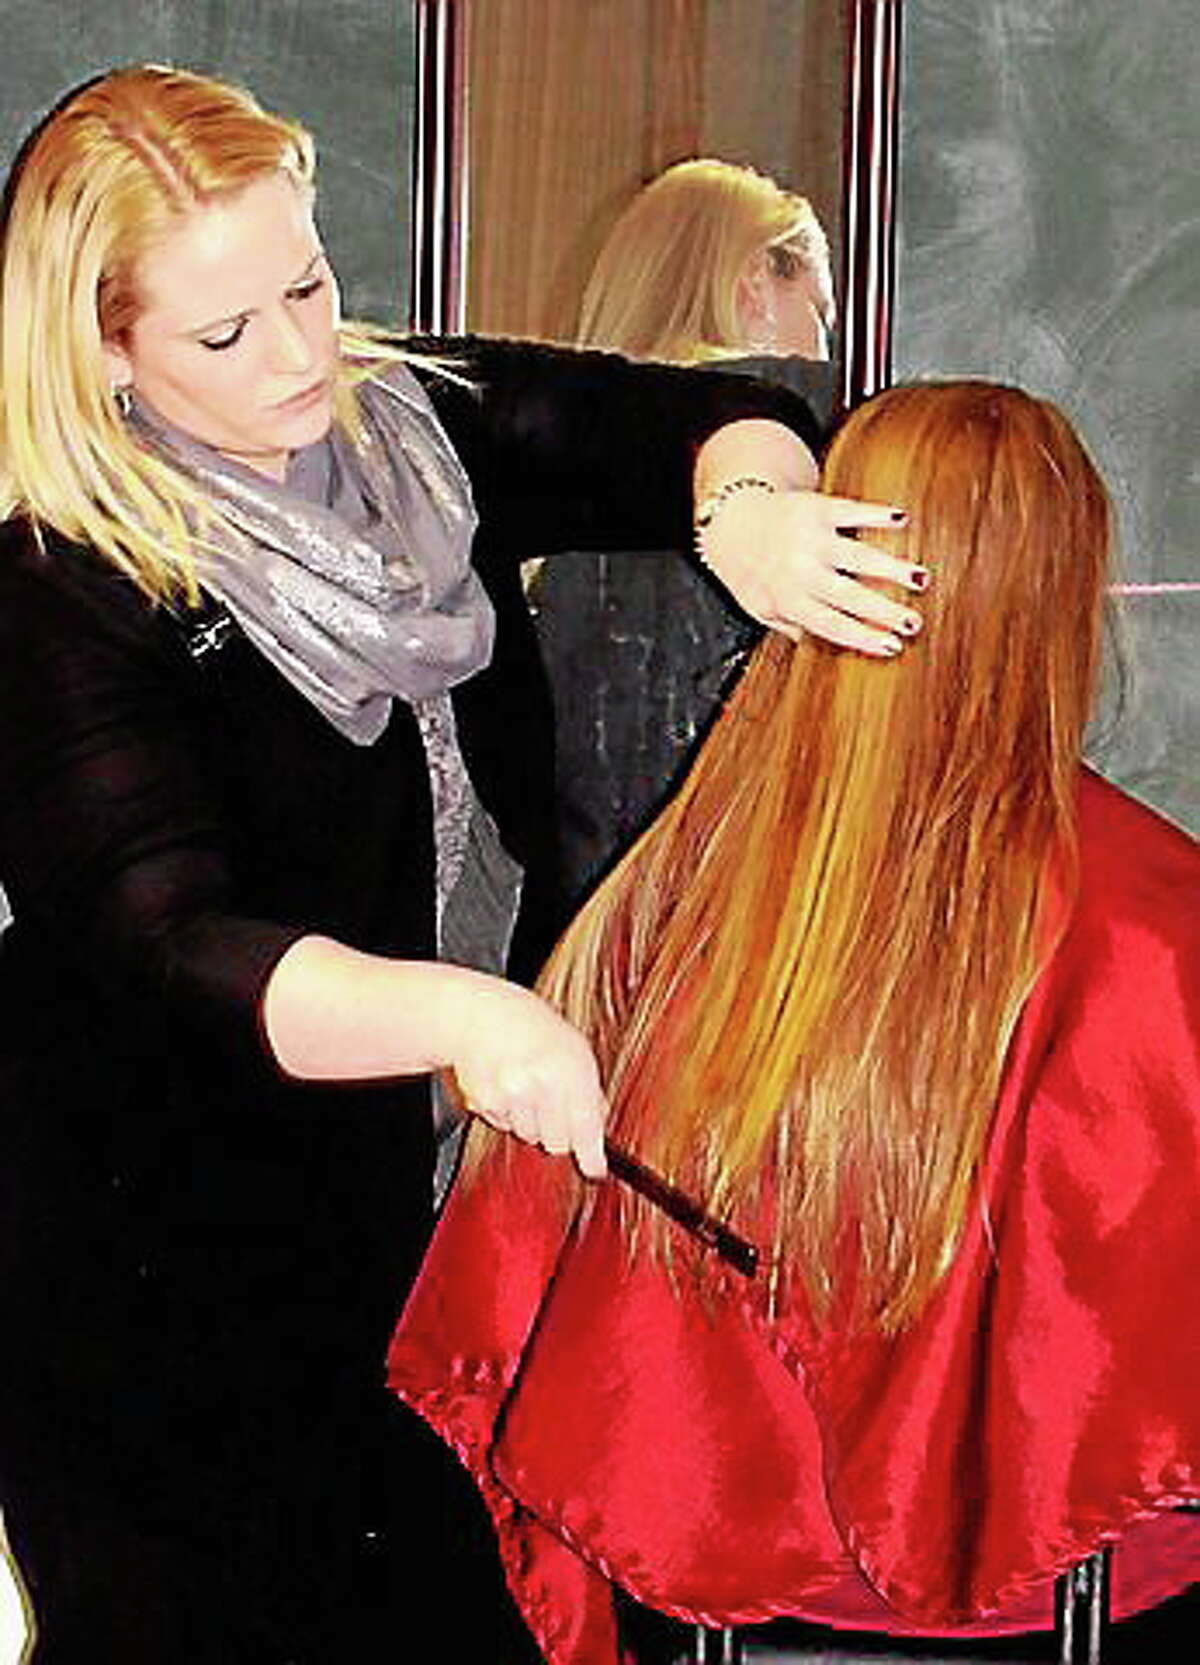 A stylist from The Cut Above hair salon in Cromwell shows a teen how to style her hair. A similar program, Decked out for December, at the library is offering tips for makeup, hair and dress for the upcoming holidays.